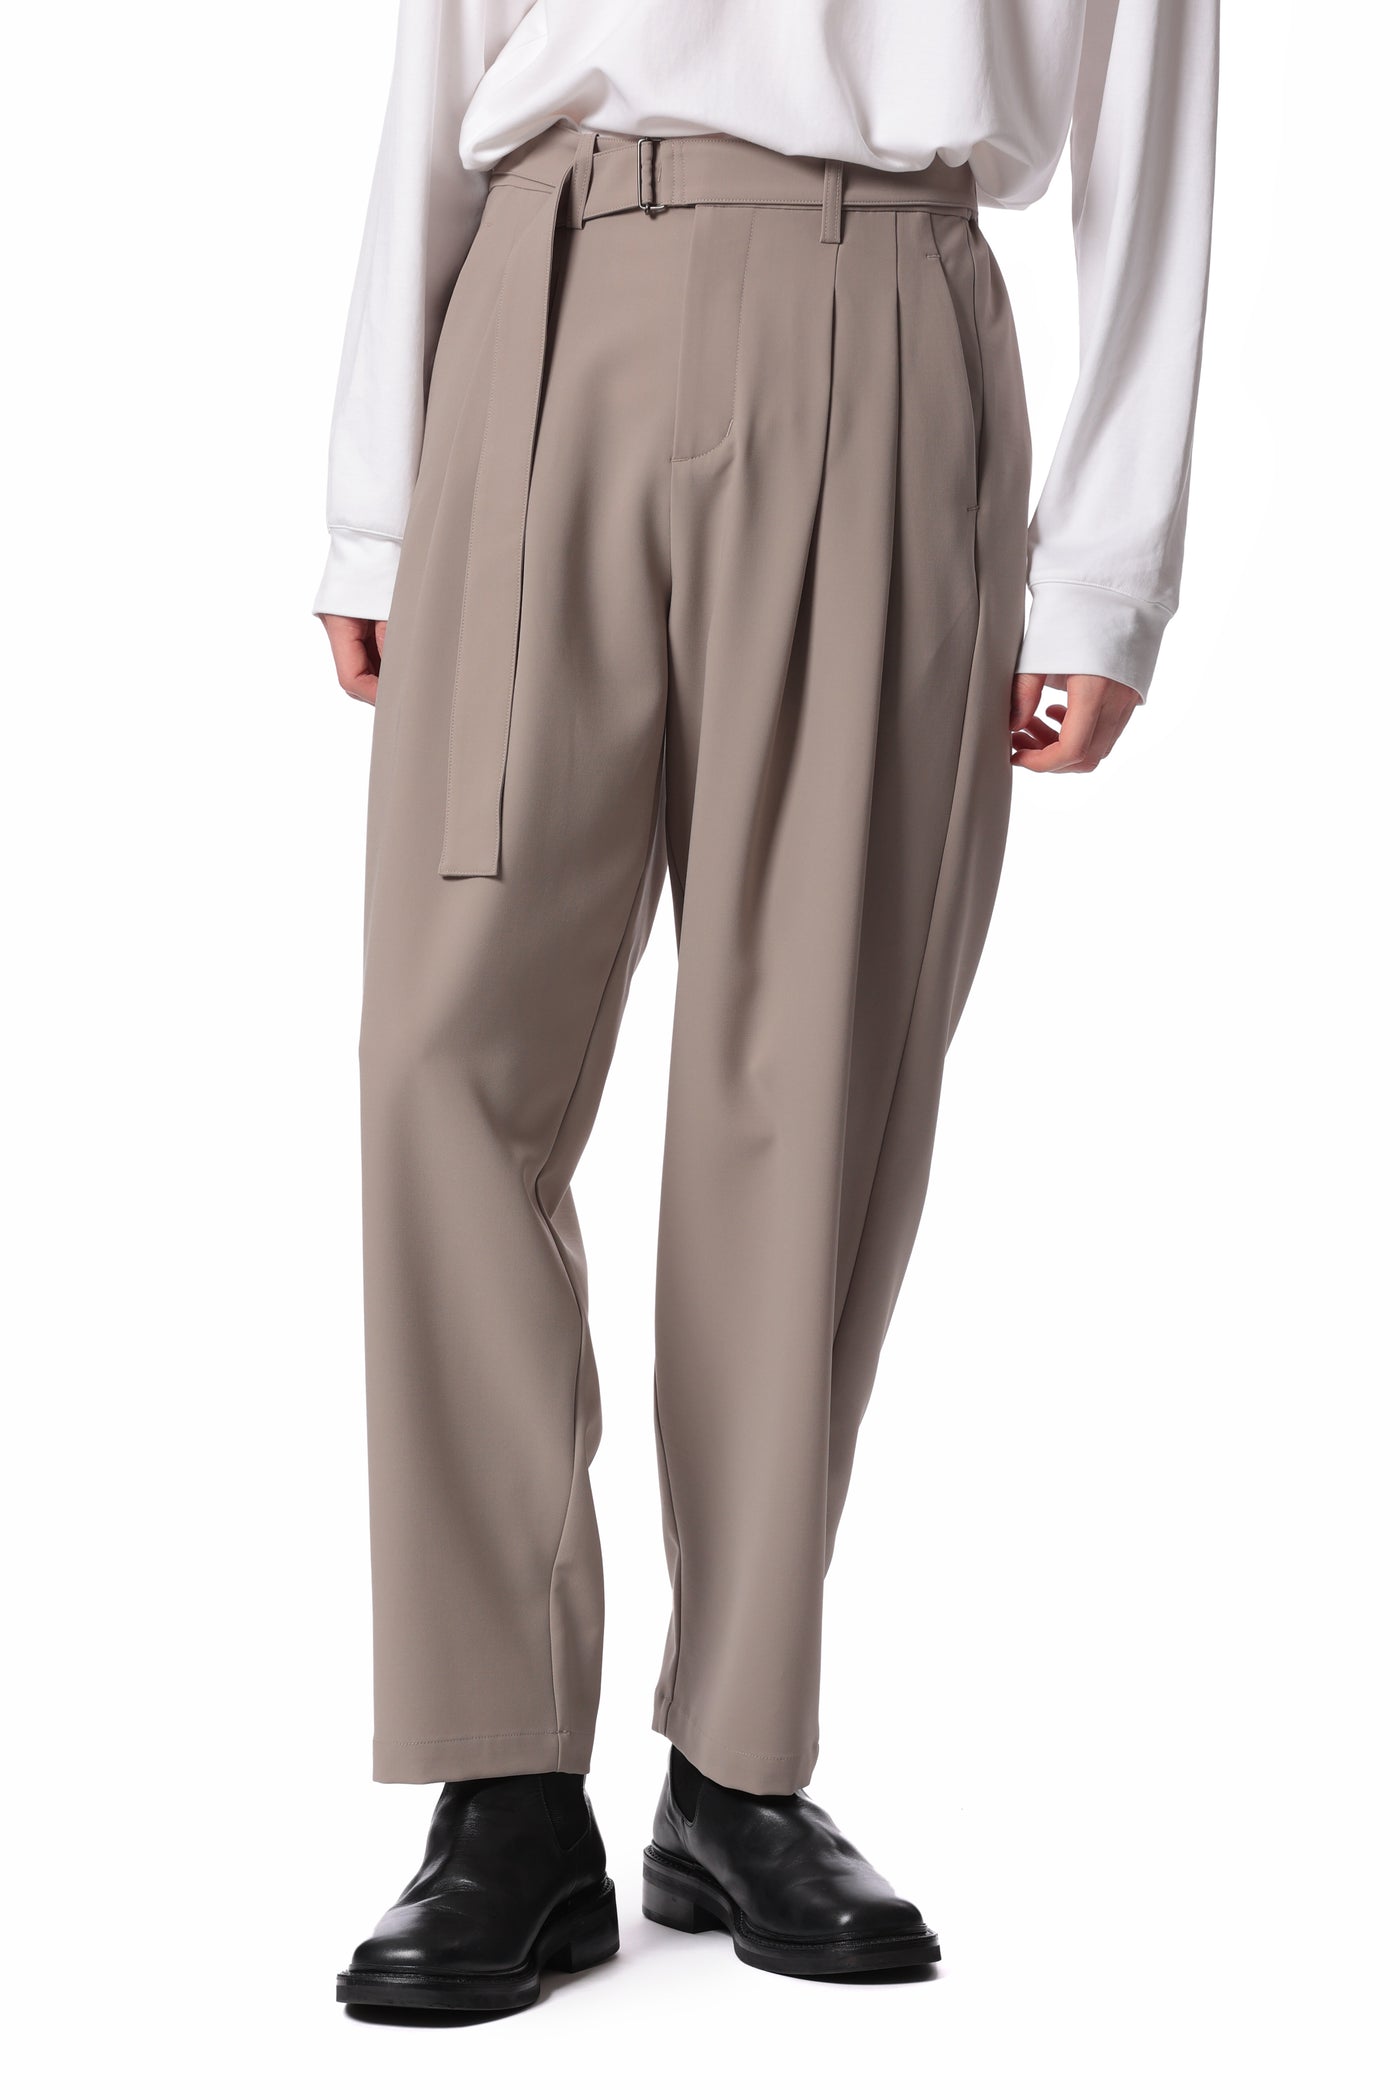 Released in February AP41-043 Polyester compact twill belted tapered pants